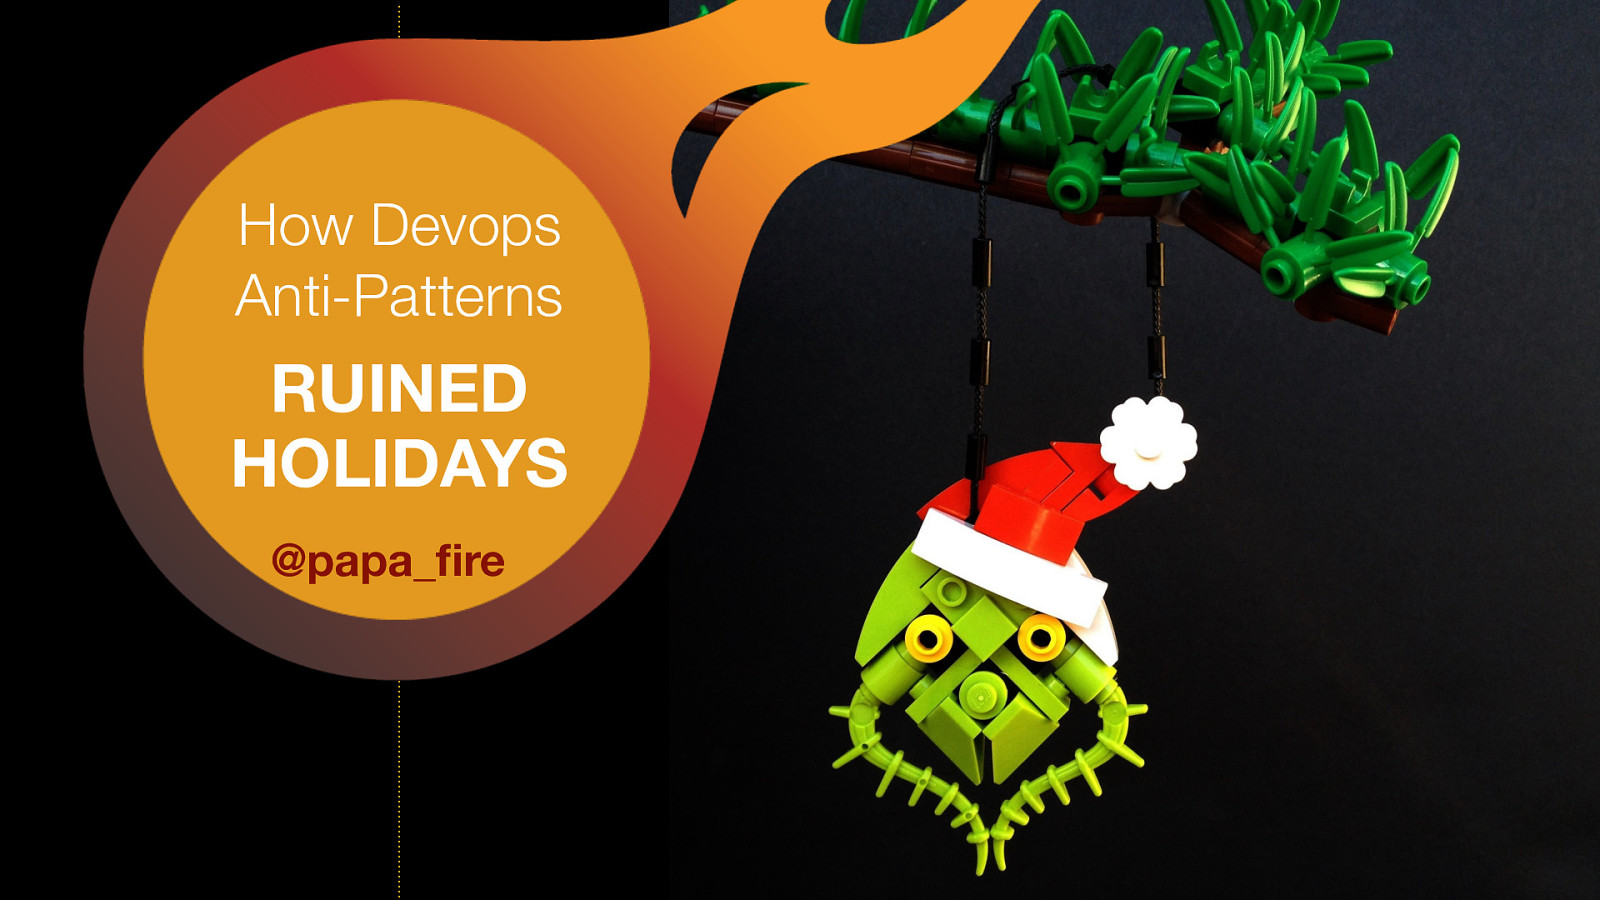 How DevOps anti-patterns ruined holidays